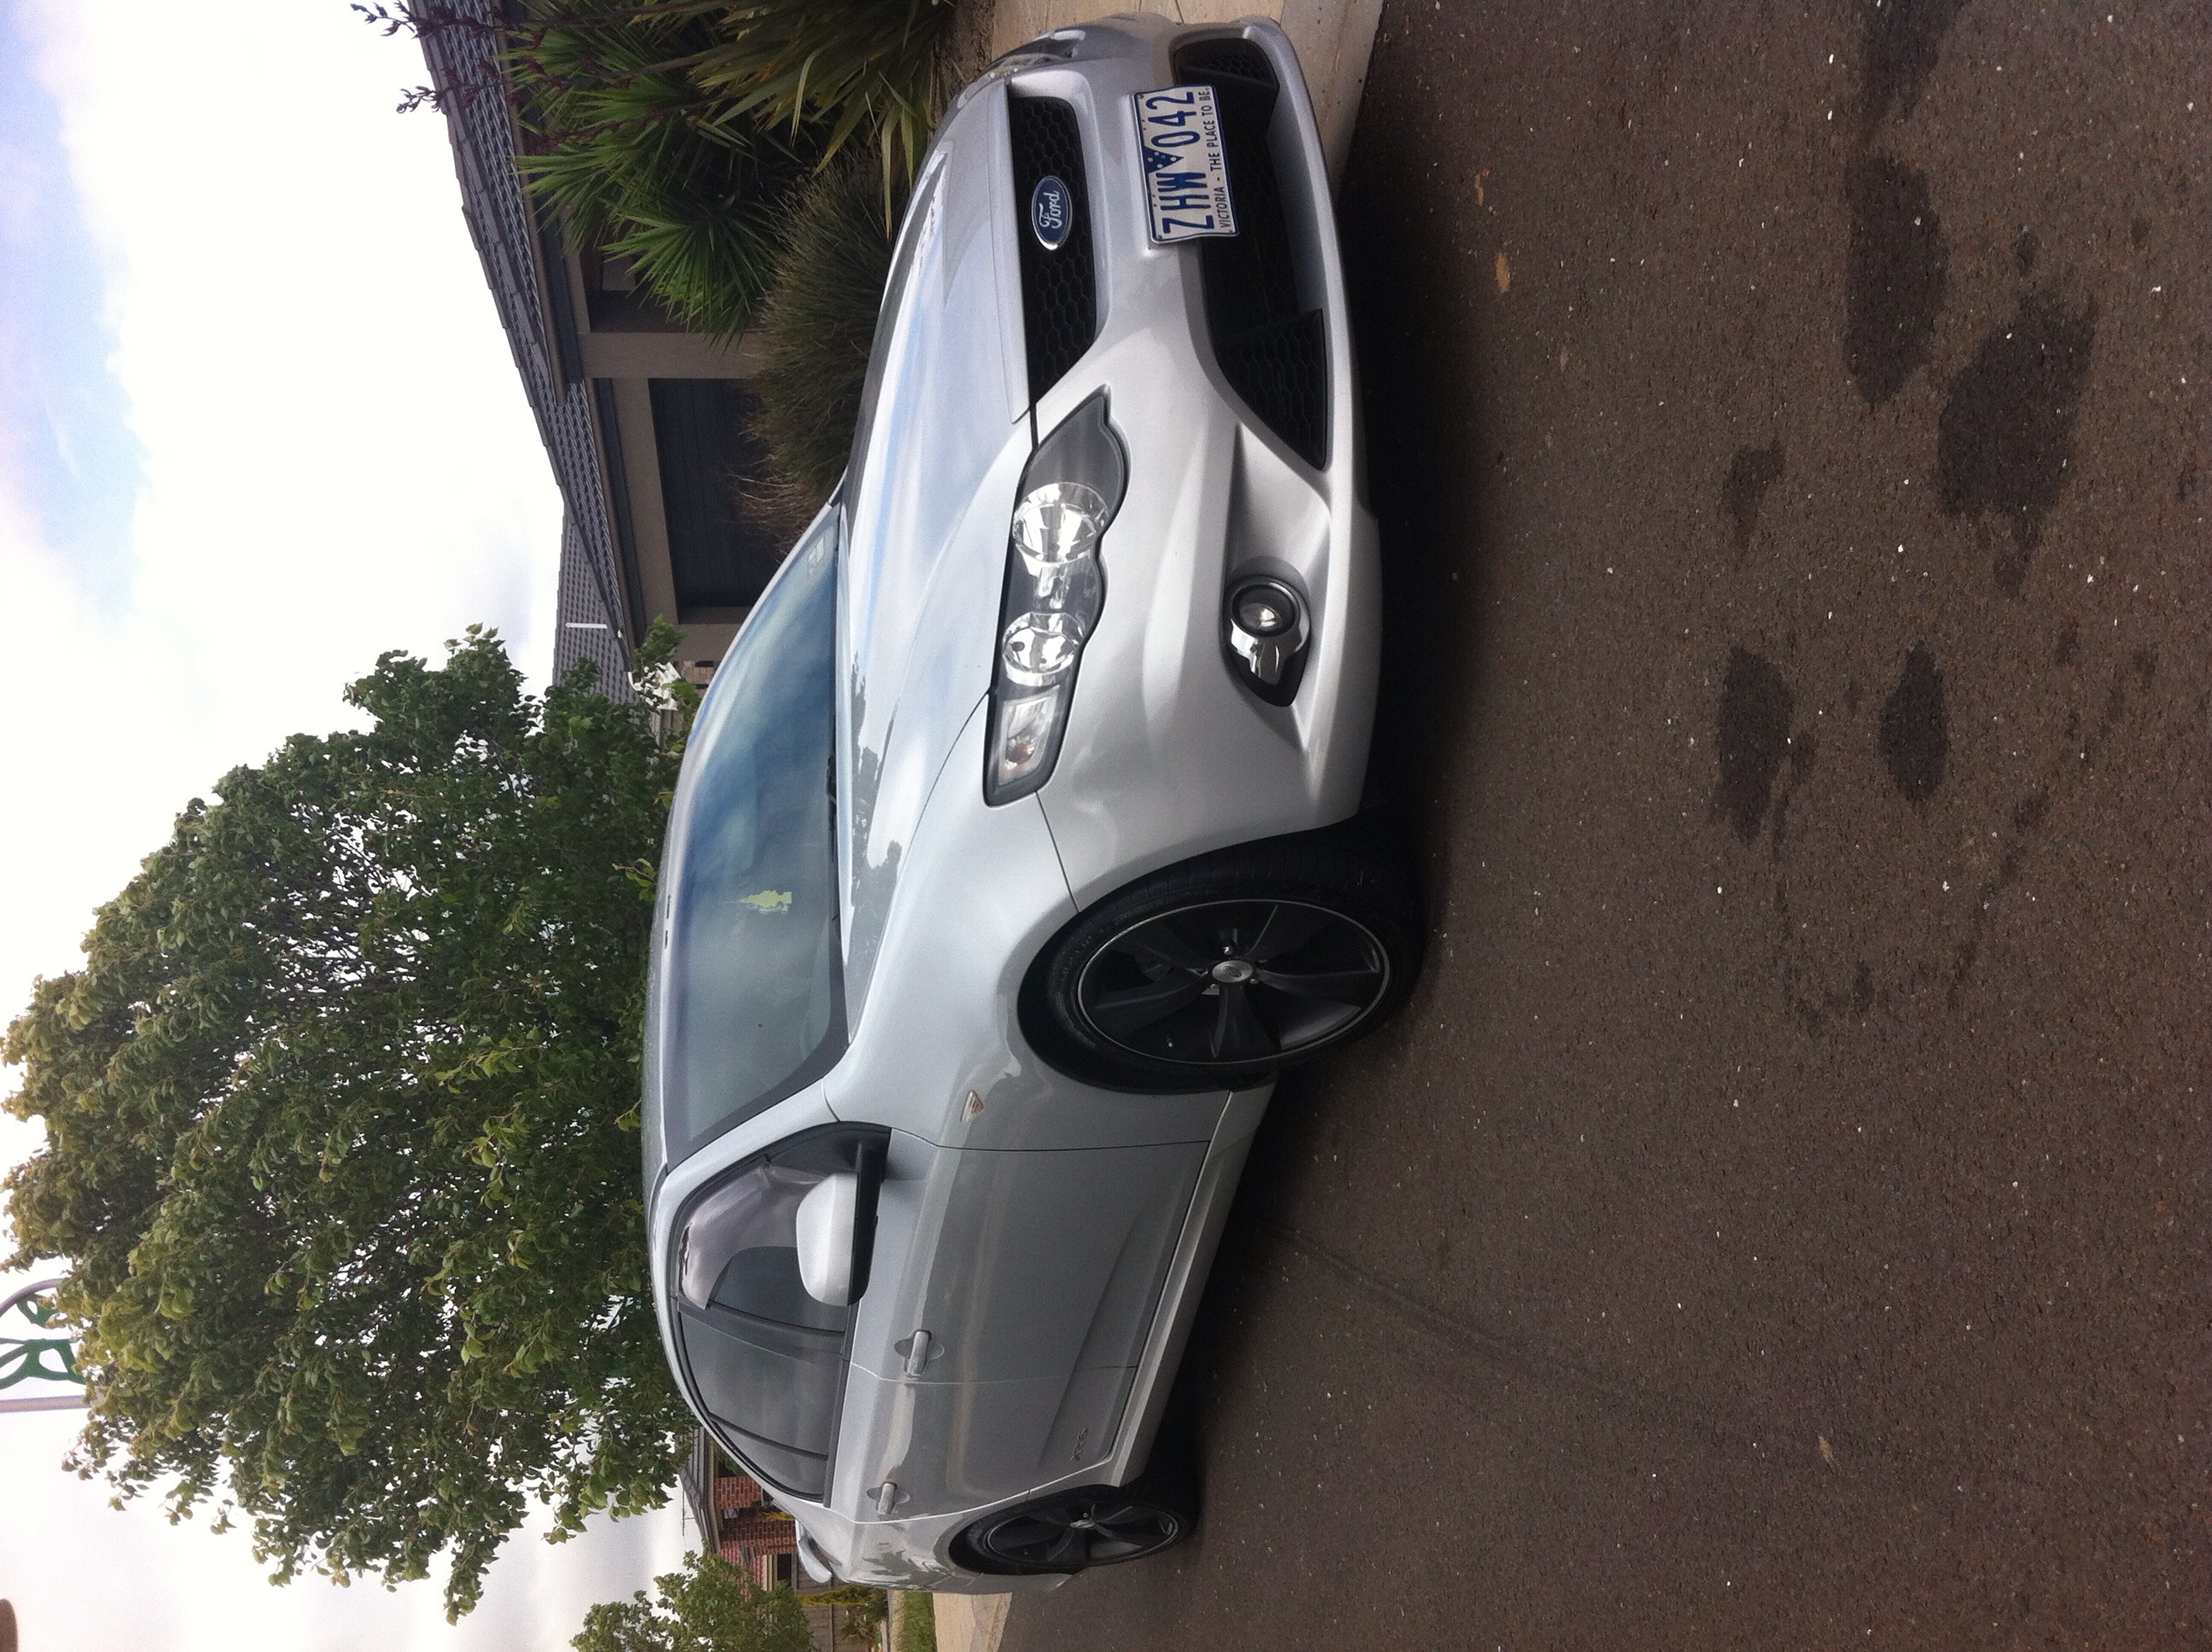 Used ford falcon xr6 sale melbourne #9